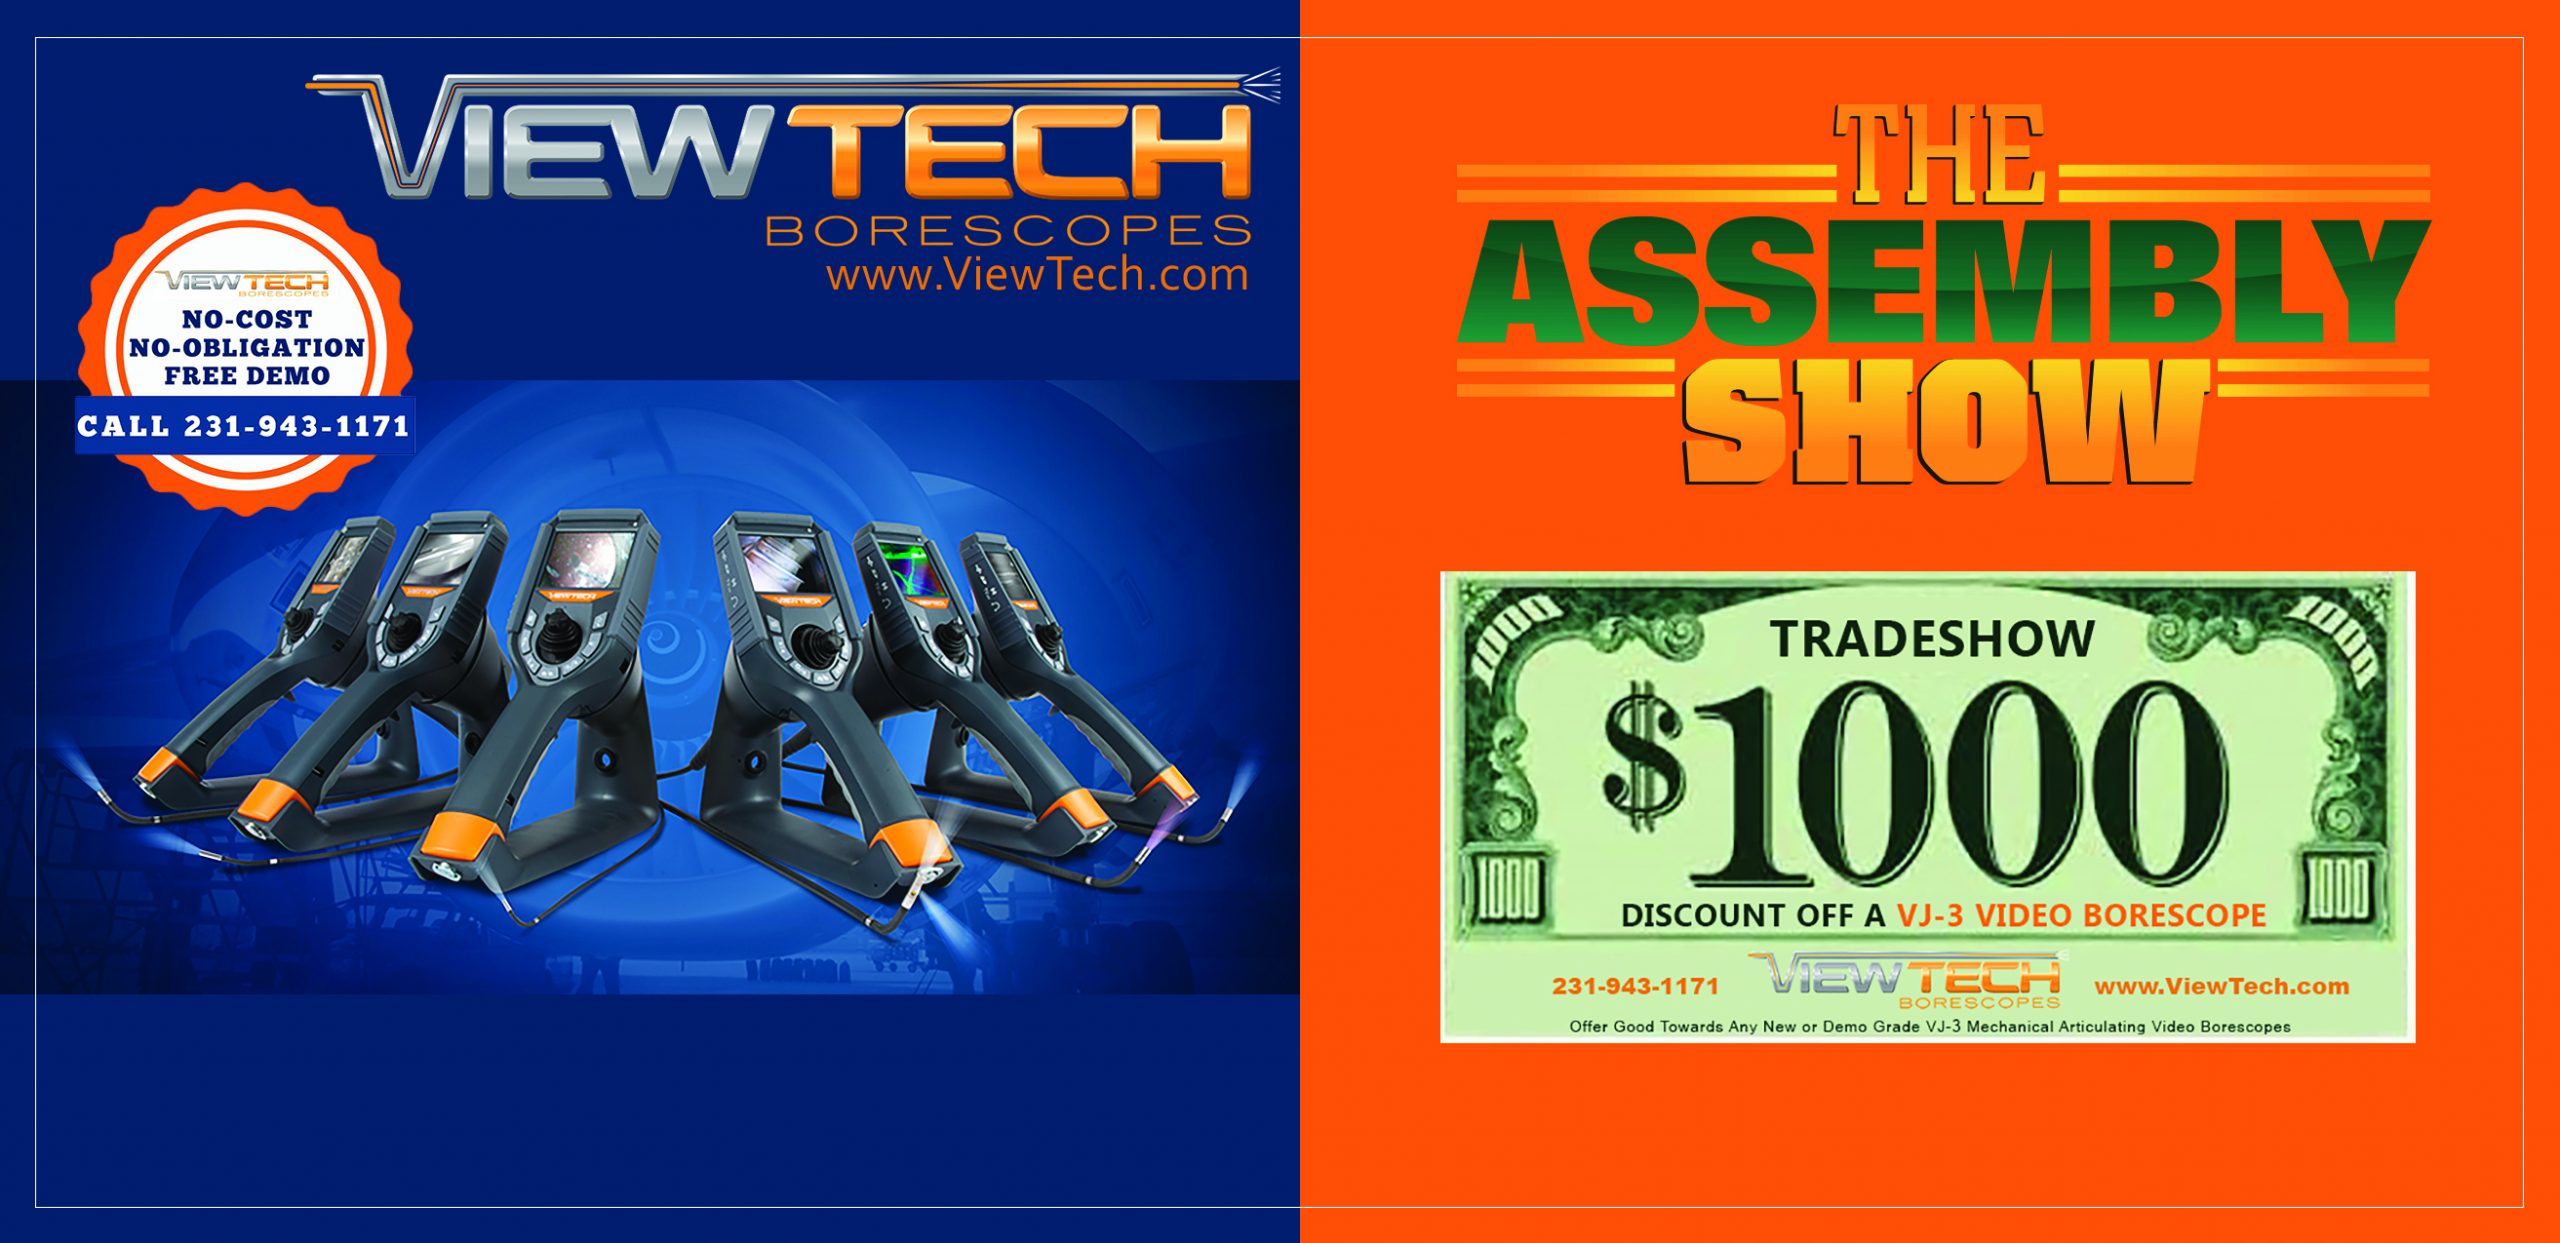 The Assembly Show 2020 ViewTech